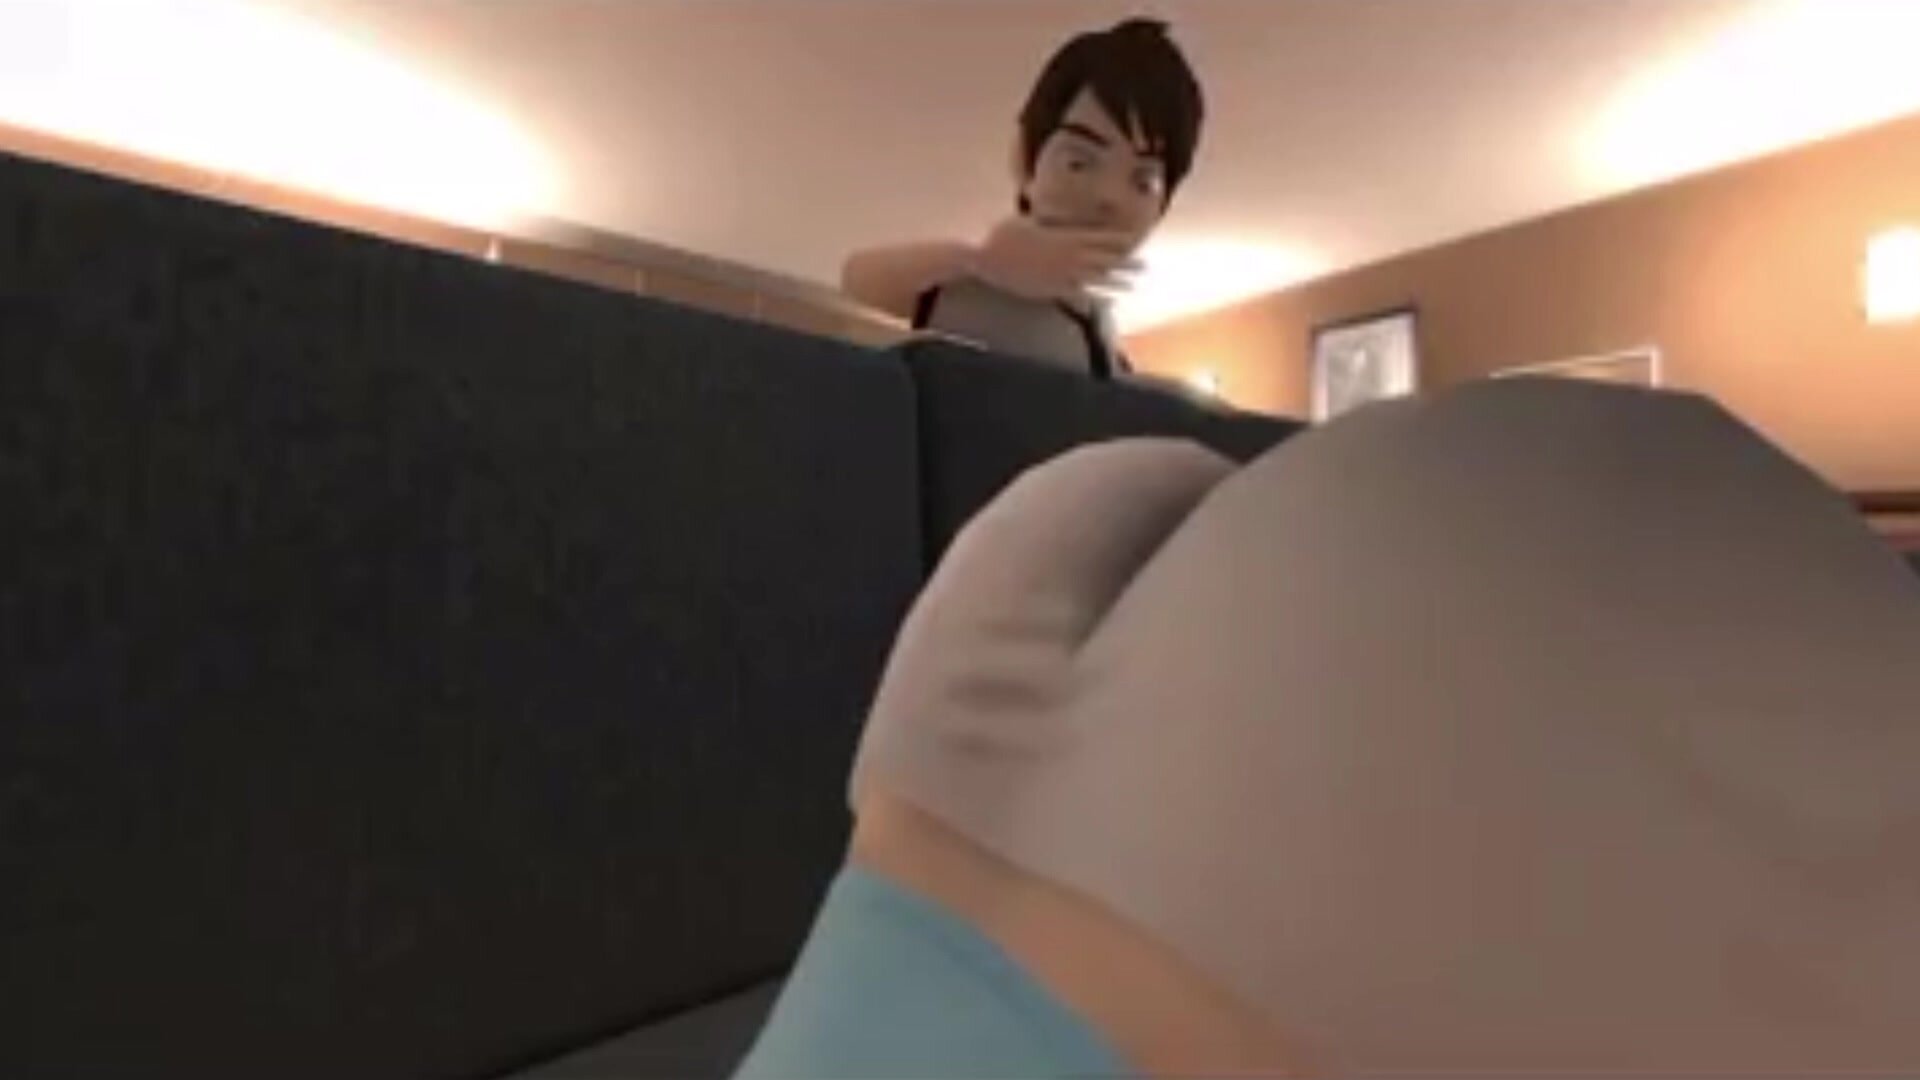 Gwen and Dexter mom farting on ben animation